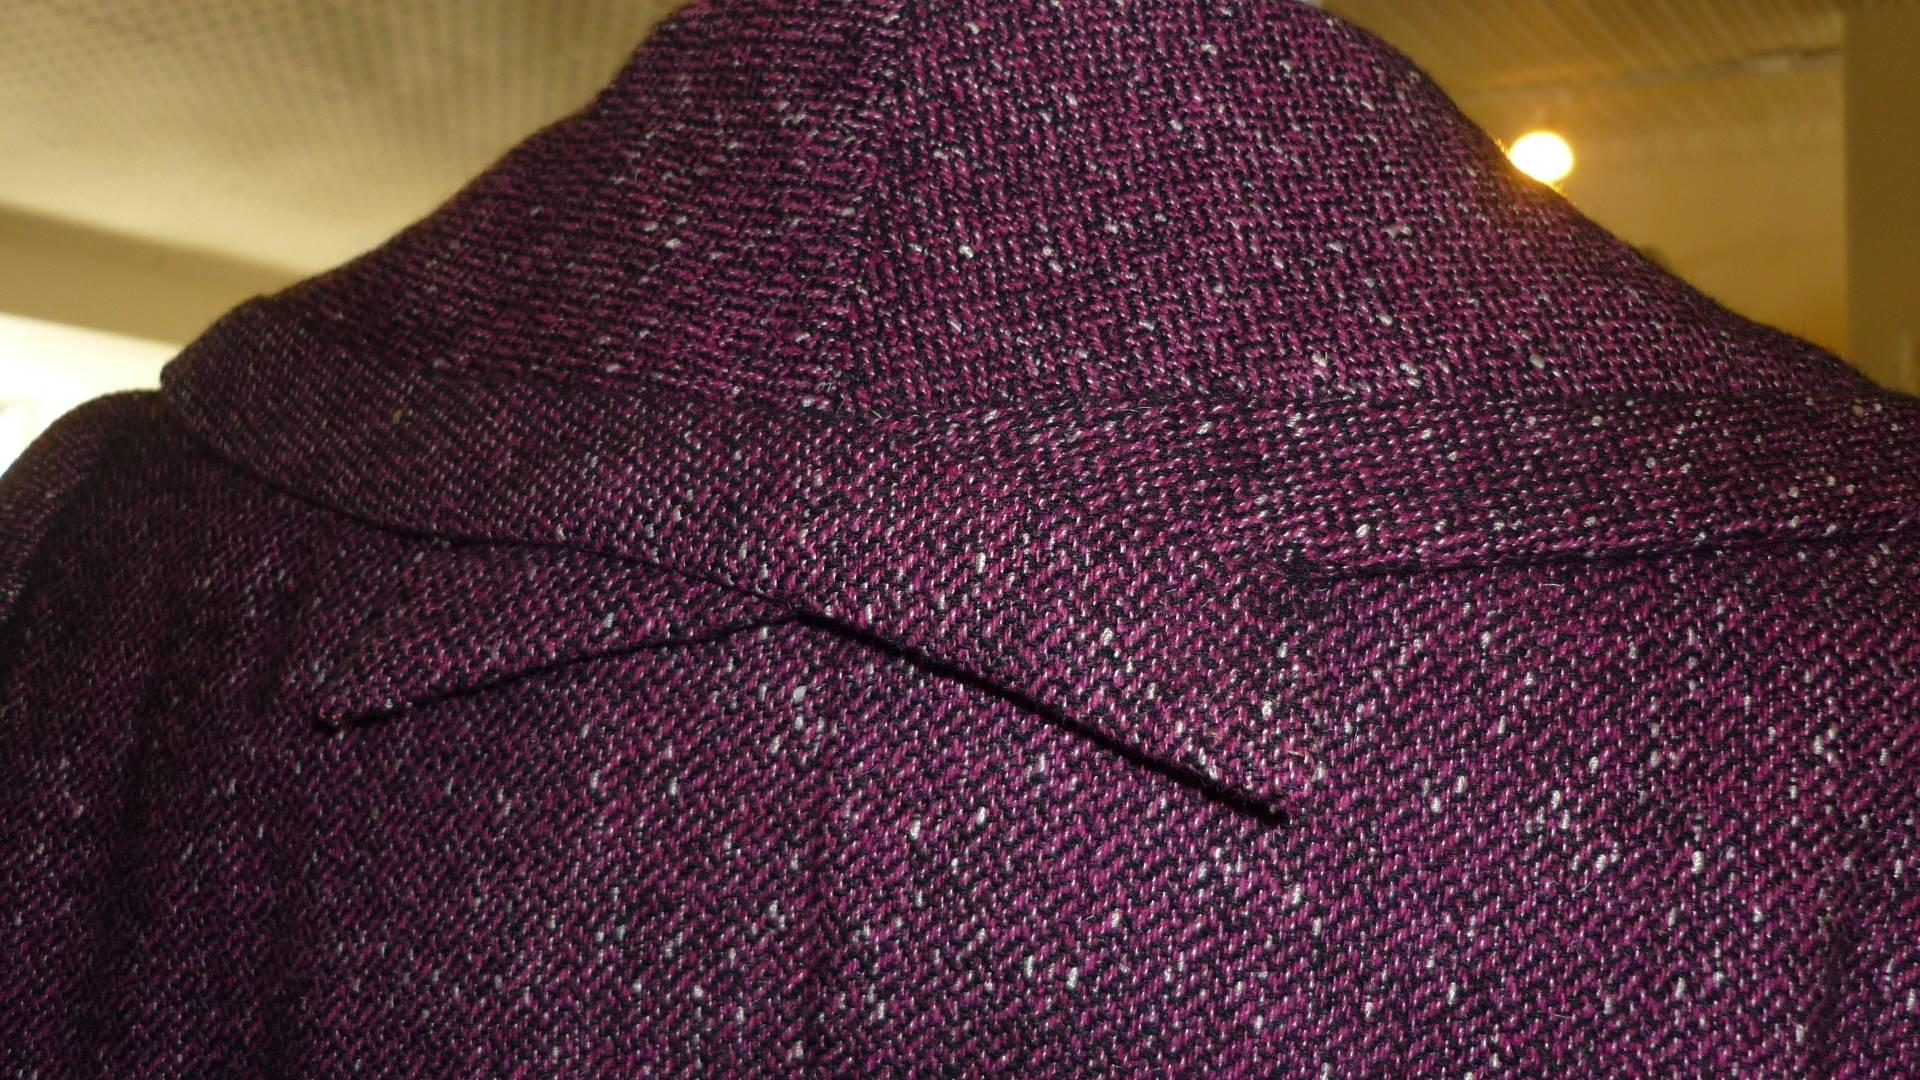 Such an elegant suit fashioned in a mainly burgundy tweed with black and white specks. The details are magnificient from the collar, to the slash pockets with a false flap, and the tiny slits on each sleeve (see pictures).